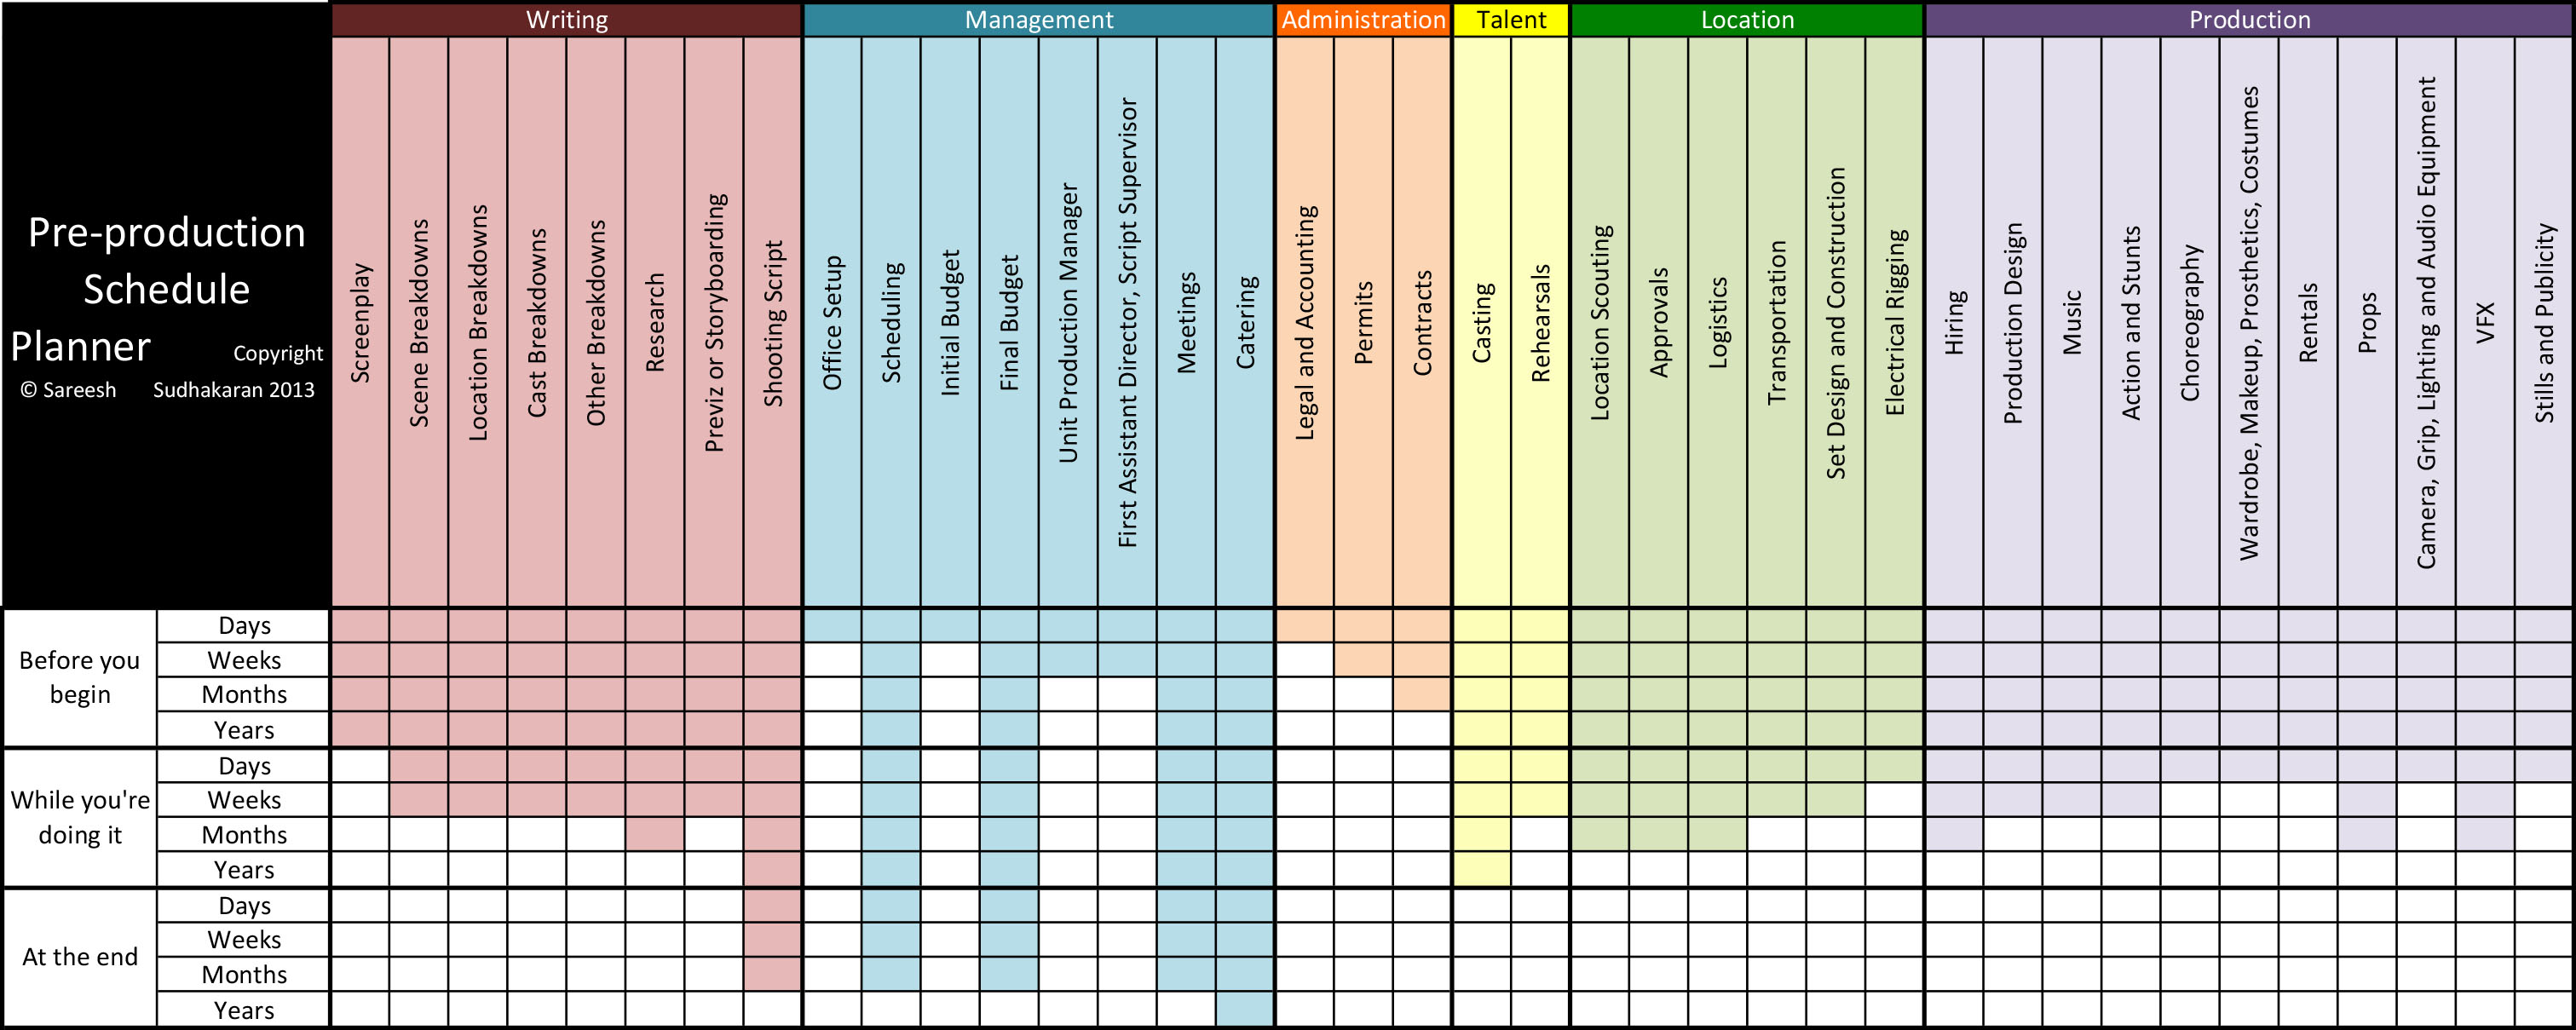 26 Images of Production Planning Chart Template | crazybiker.net